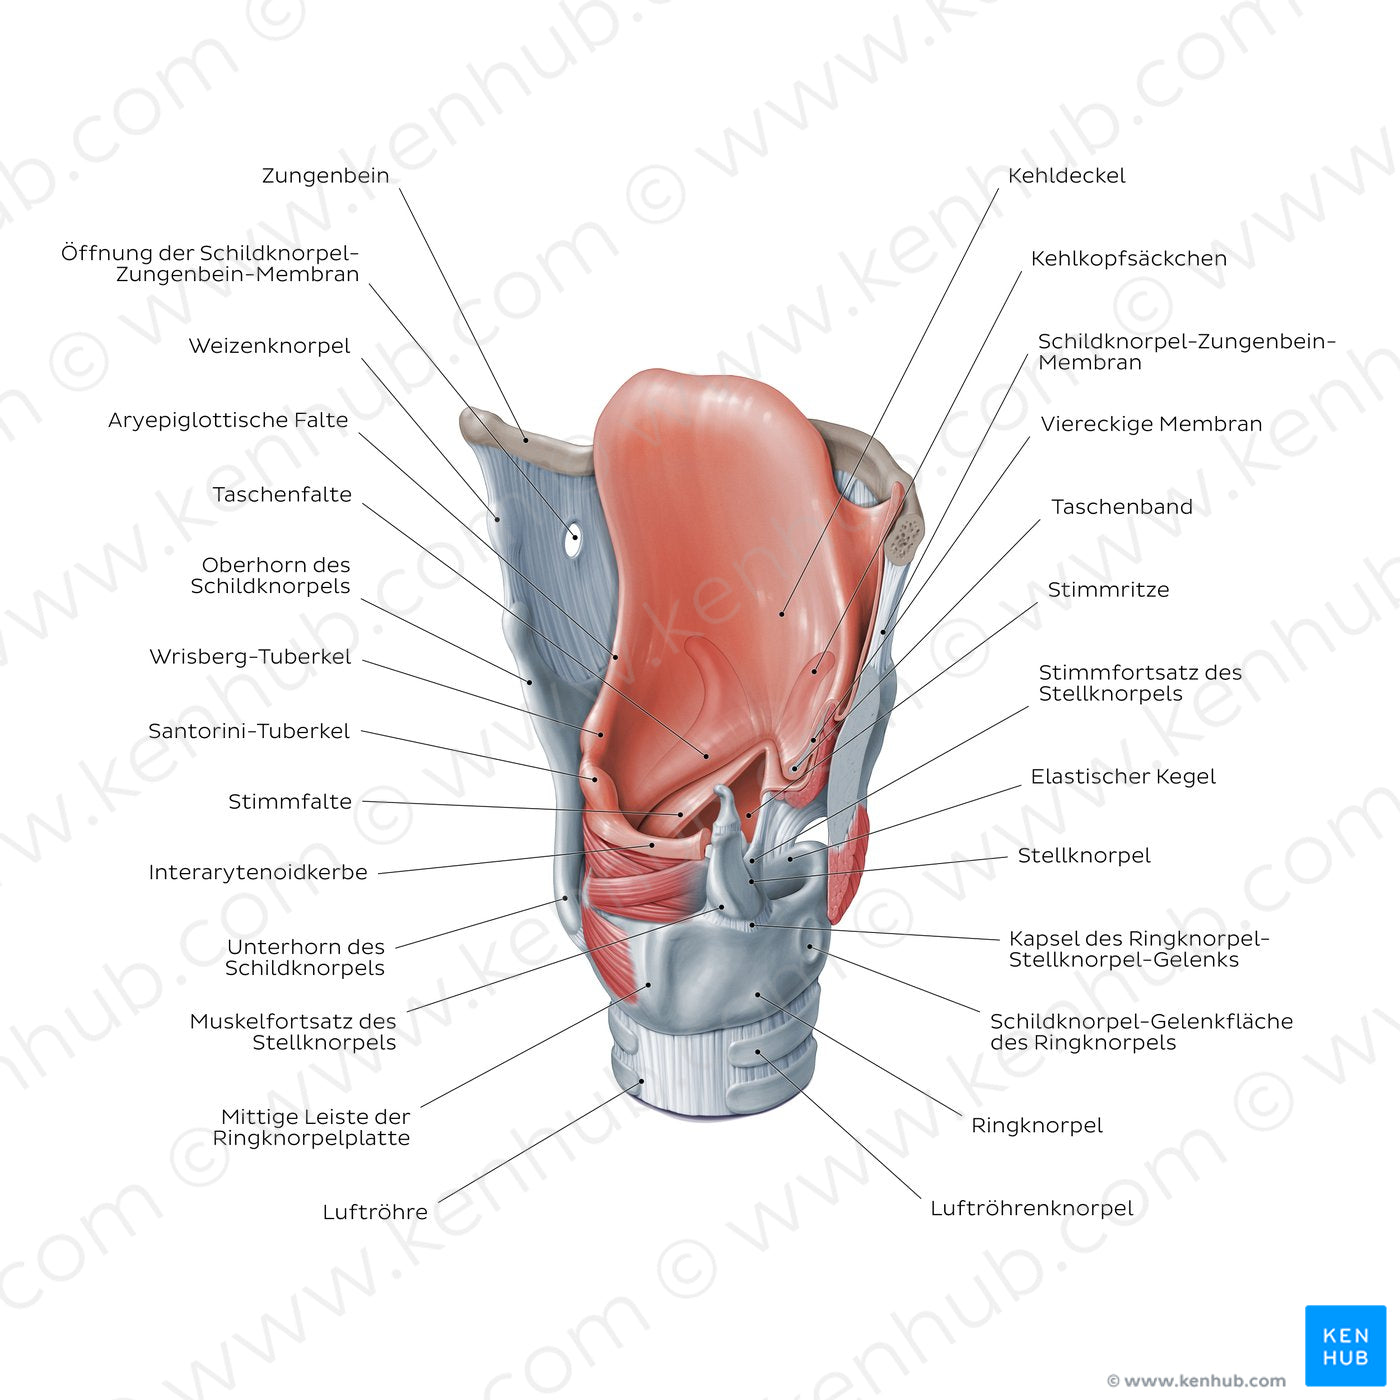 Structure of the larynx: posterolateral view (German)